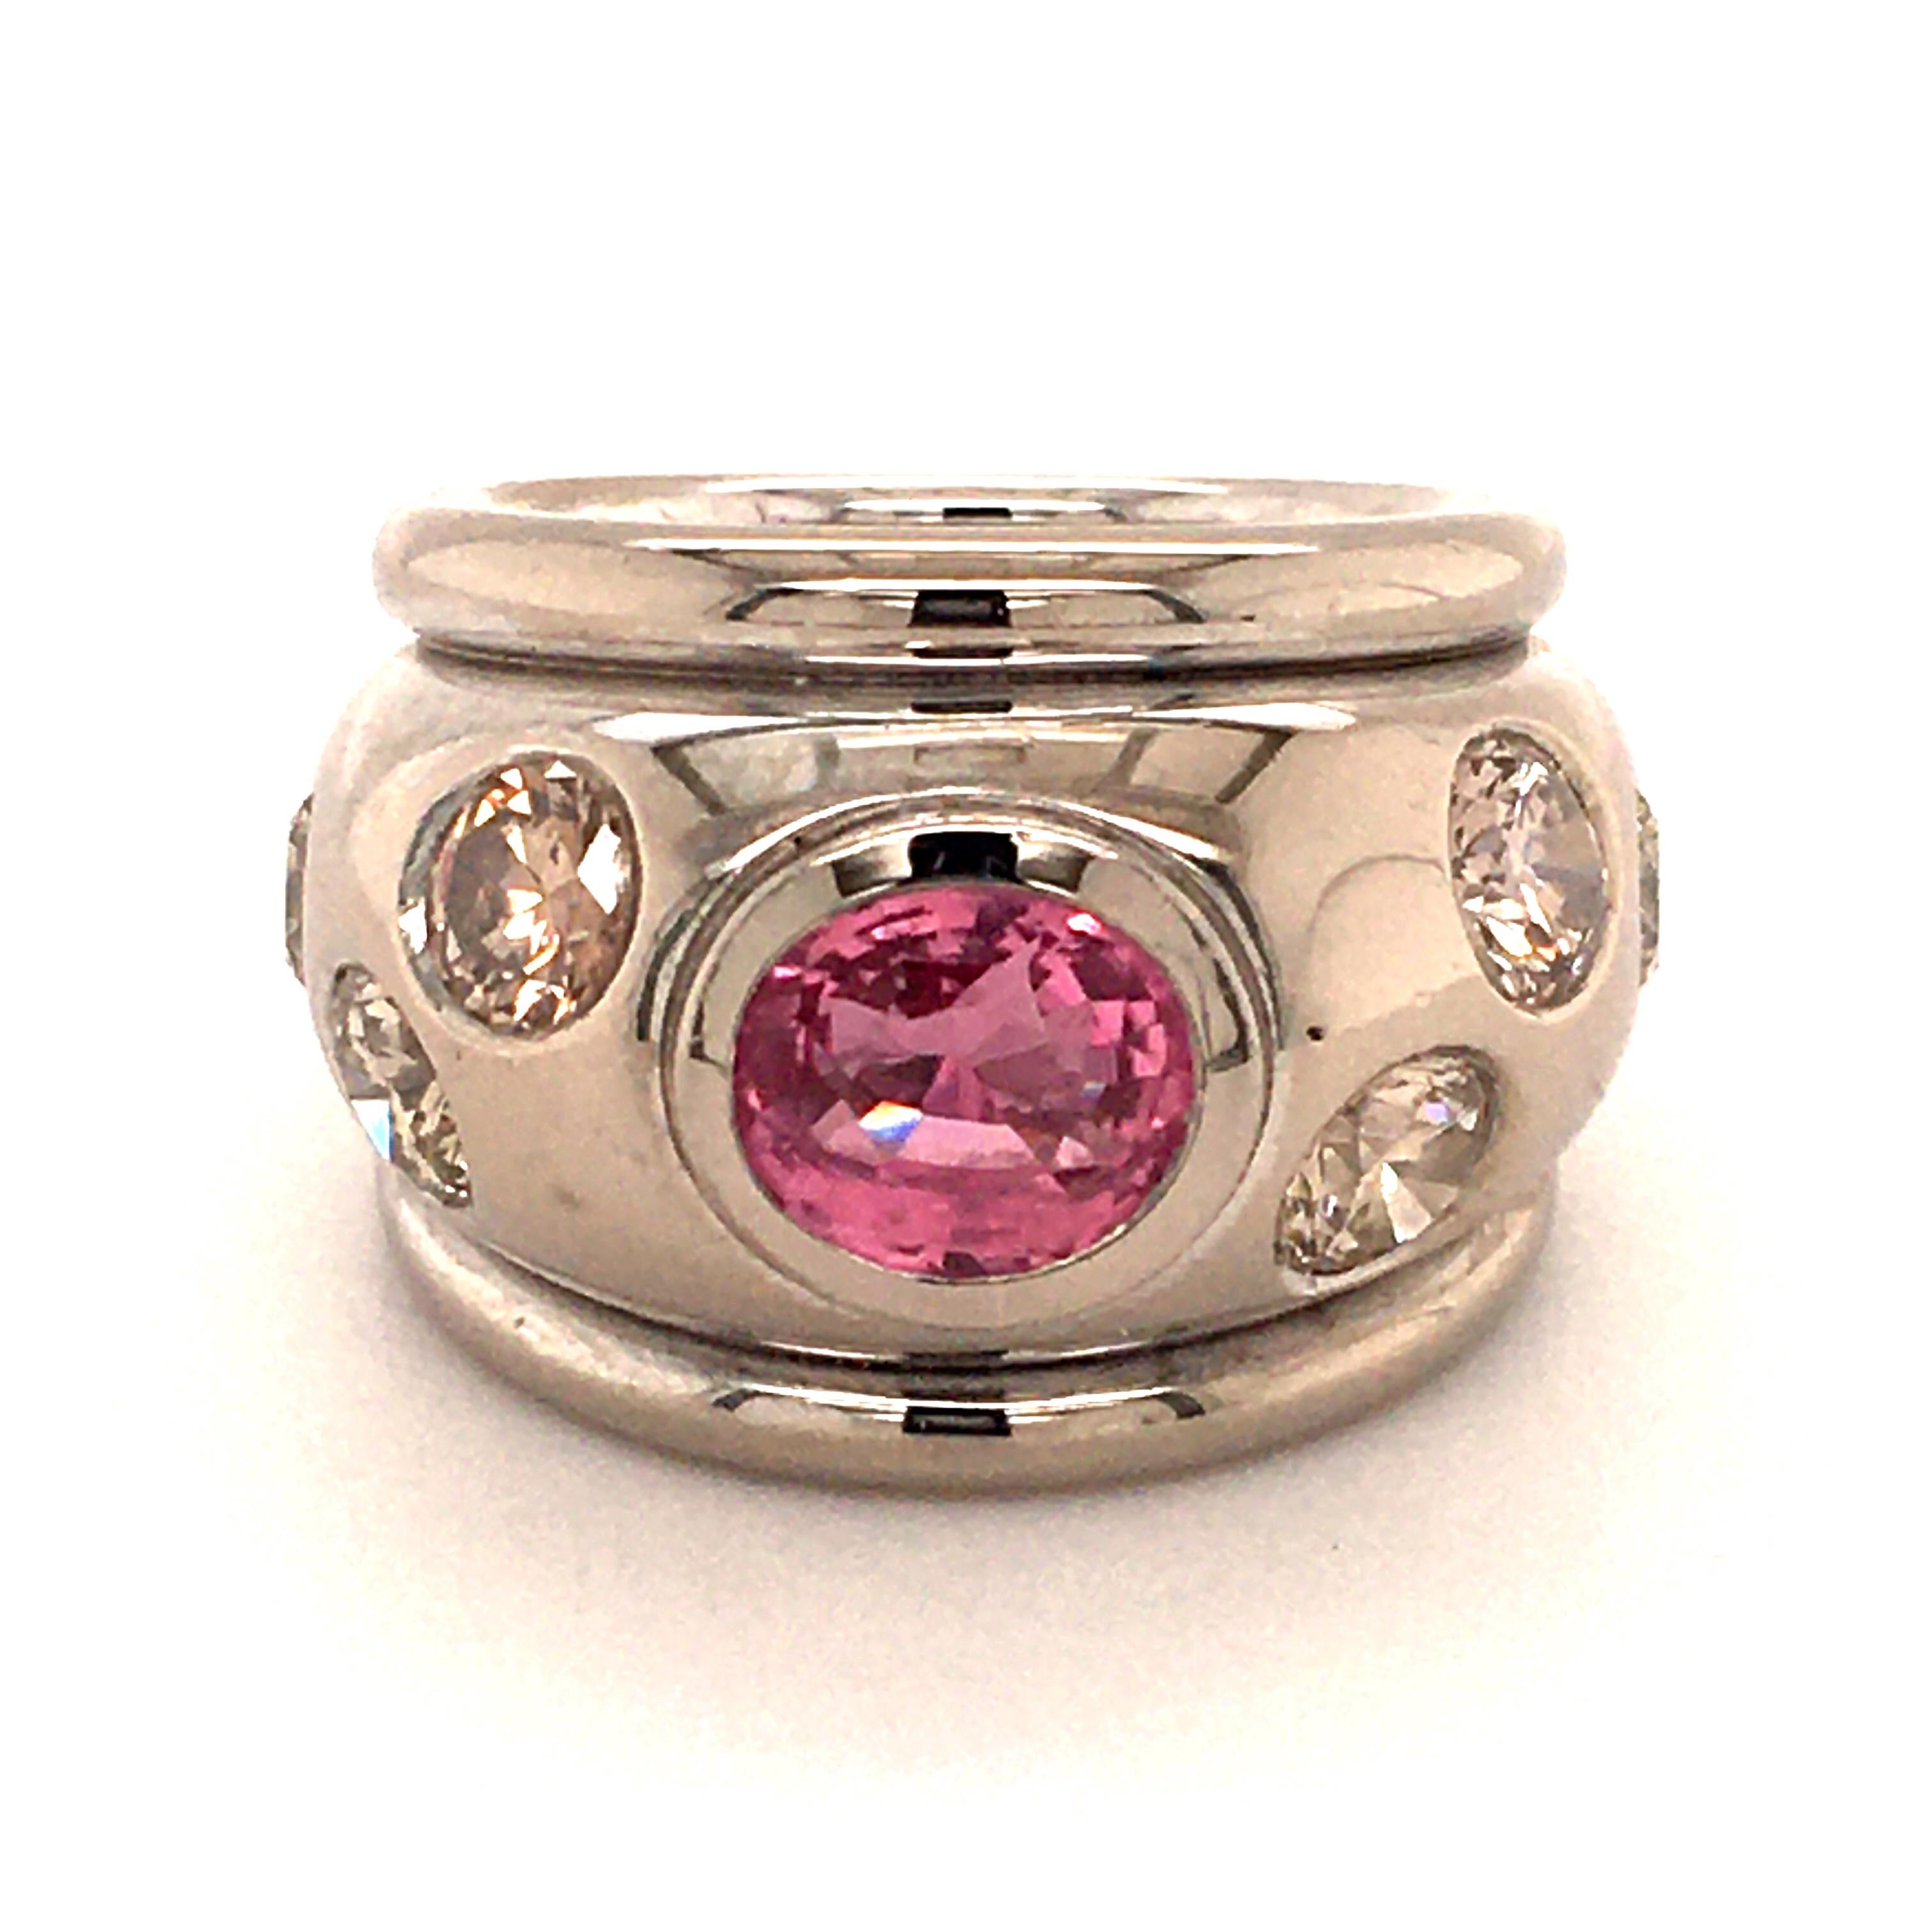 This bold and unique handcrafted ring in 18 karat white gold features one oval shaped untreated pink sapphire of 2.58 carats and 6 brilliant cut diamonds of various light brown shades and vs clarity, total weight 2.50 carats. 

Size: 51.5 EU / 6